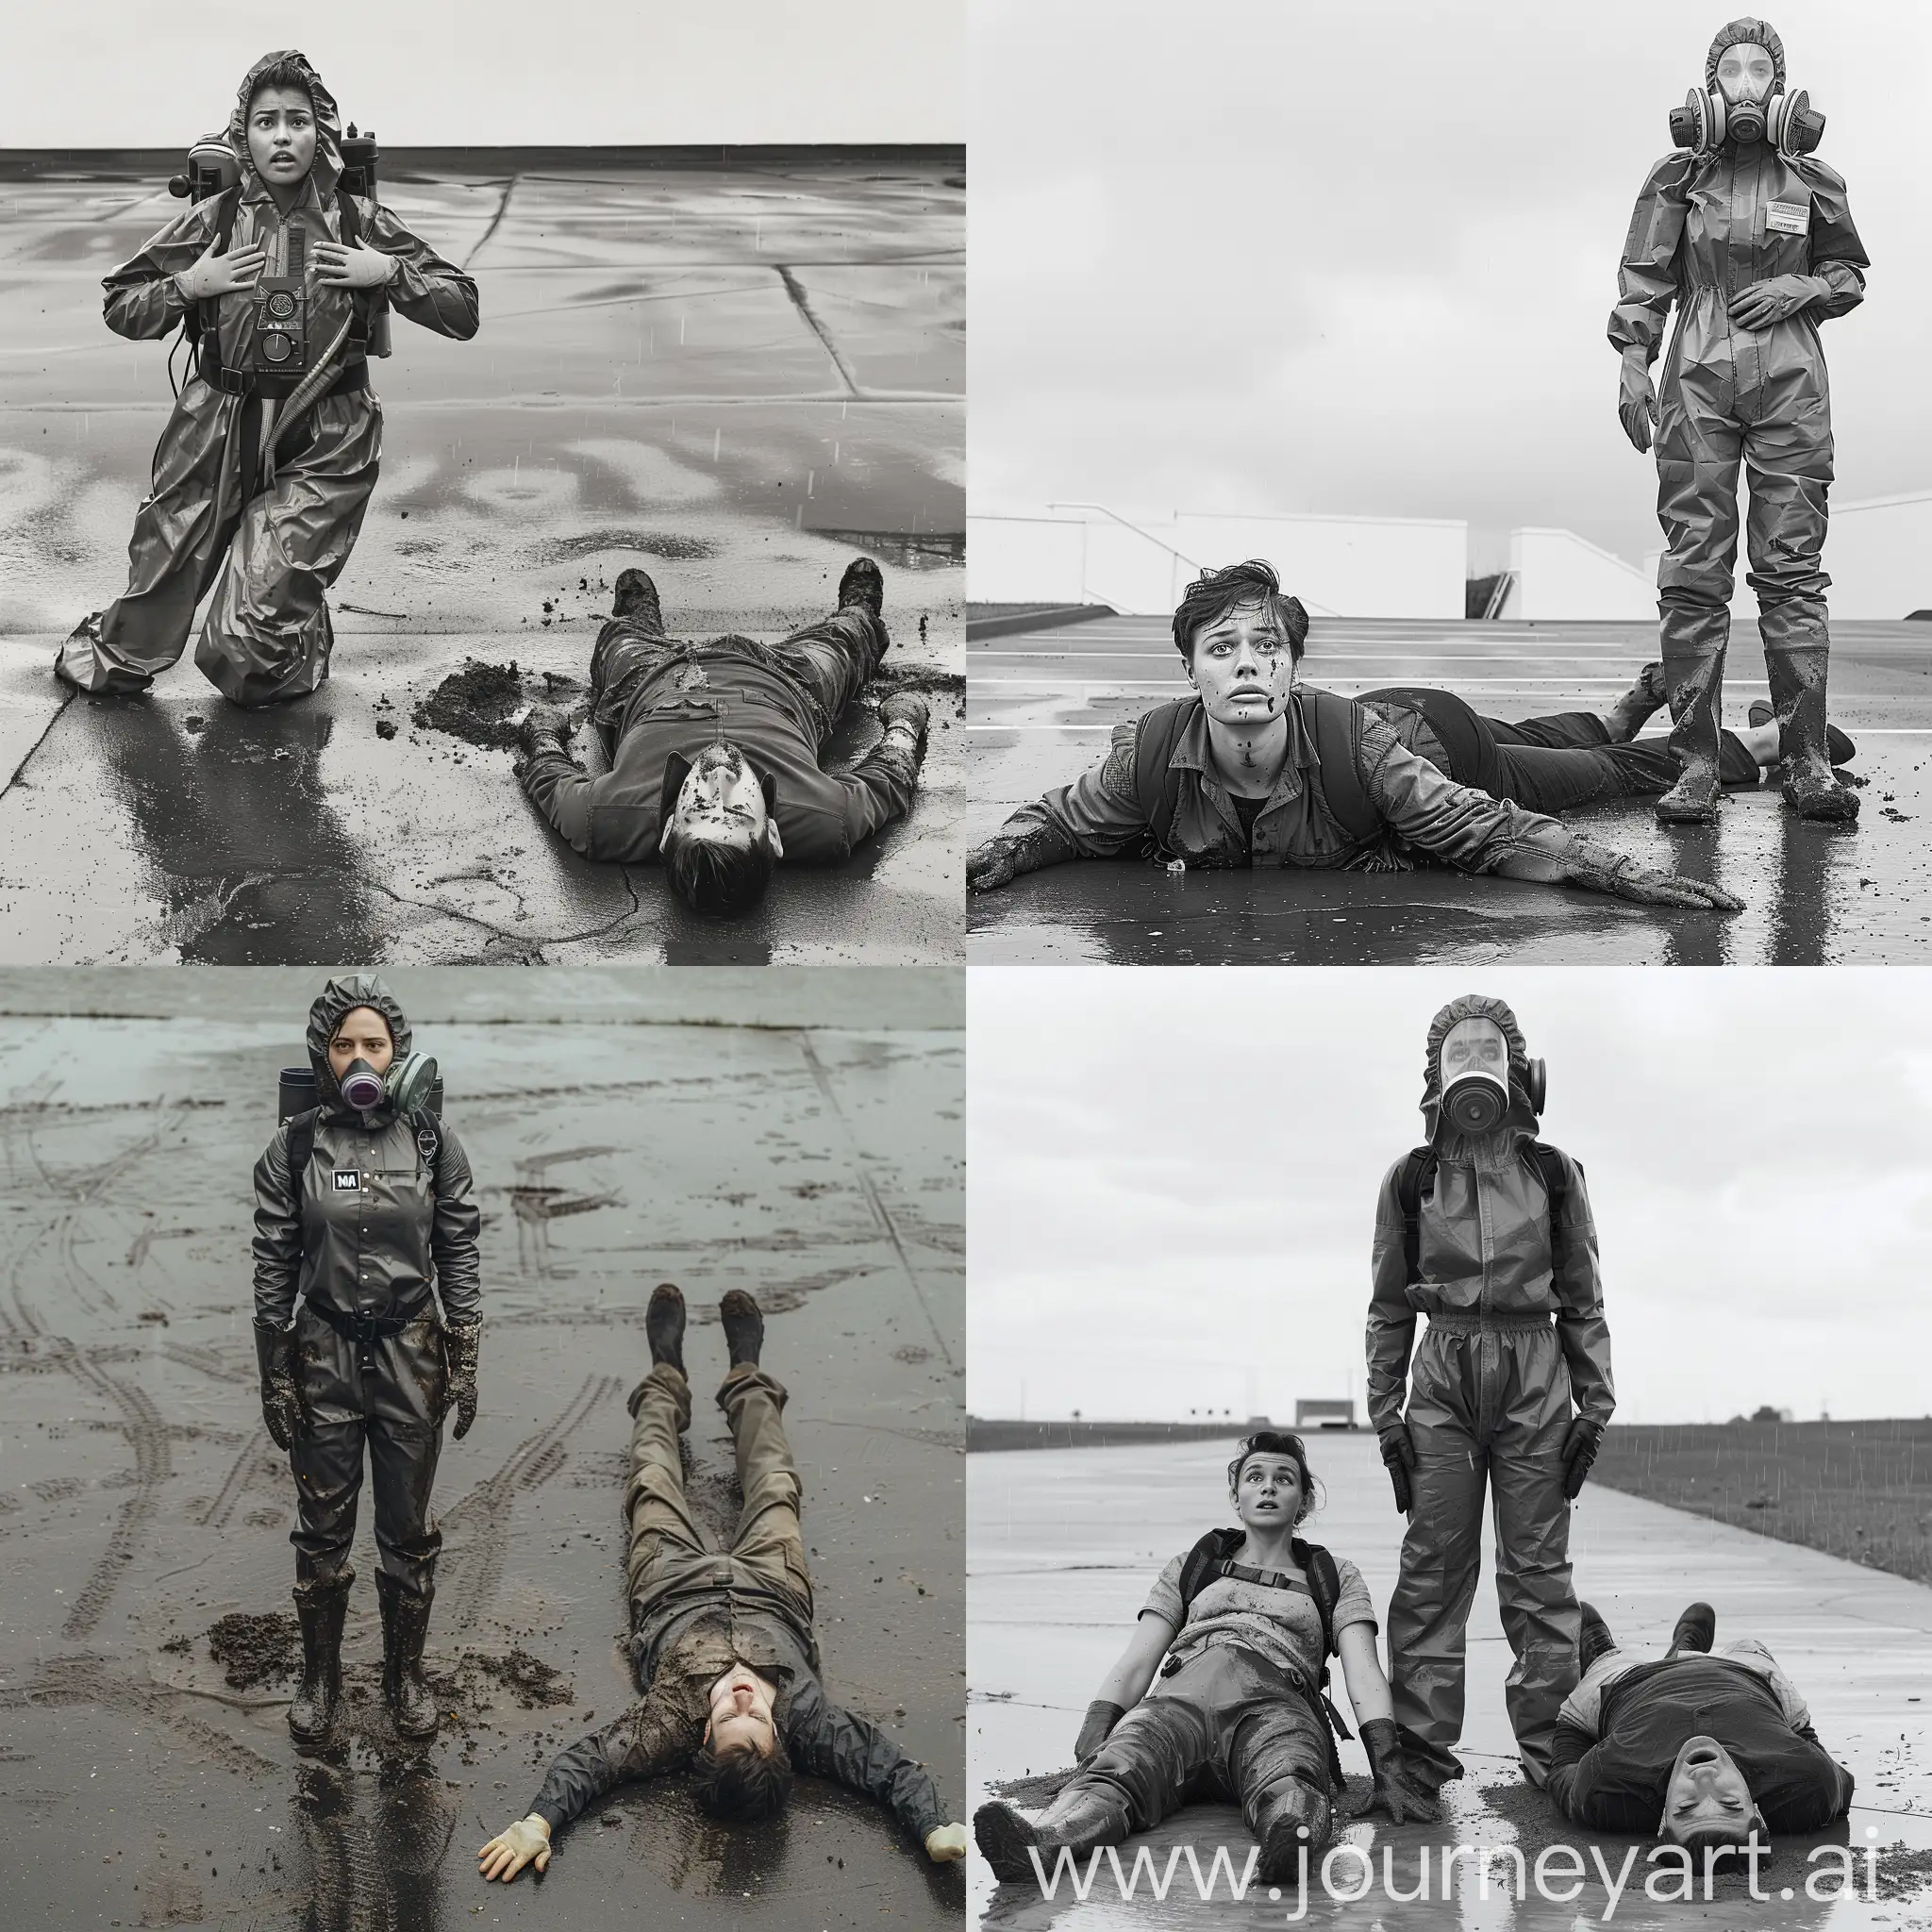 full-length photo of two persons. outdoor, rainy day, pavement.
person 1: woman, protective gear, rubber, strong hazmat suit with hood, fullbody, 3M fullface mask with visor, oxygen tanks on the back, rubber gloves, rubber shoes, stand straight, hands on the chest, confident, drops of mud on suit
person 2: man, casual outfit, lays on the ground in mud, scared